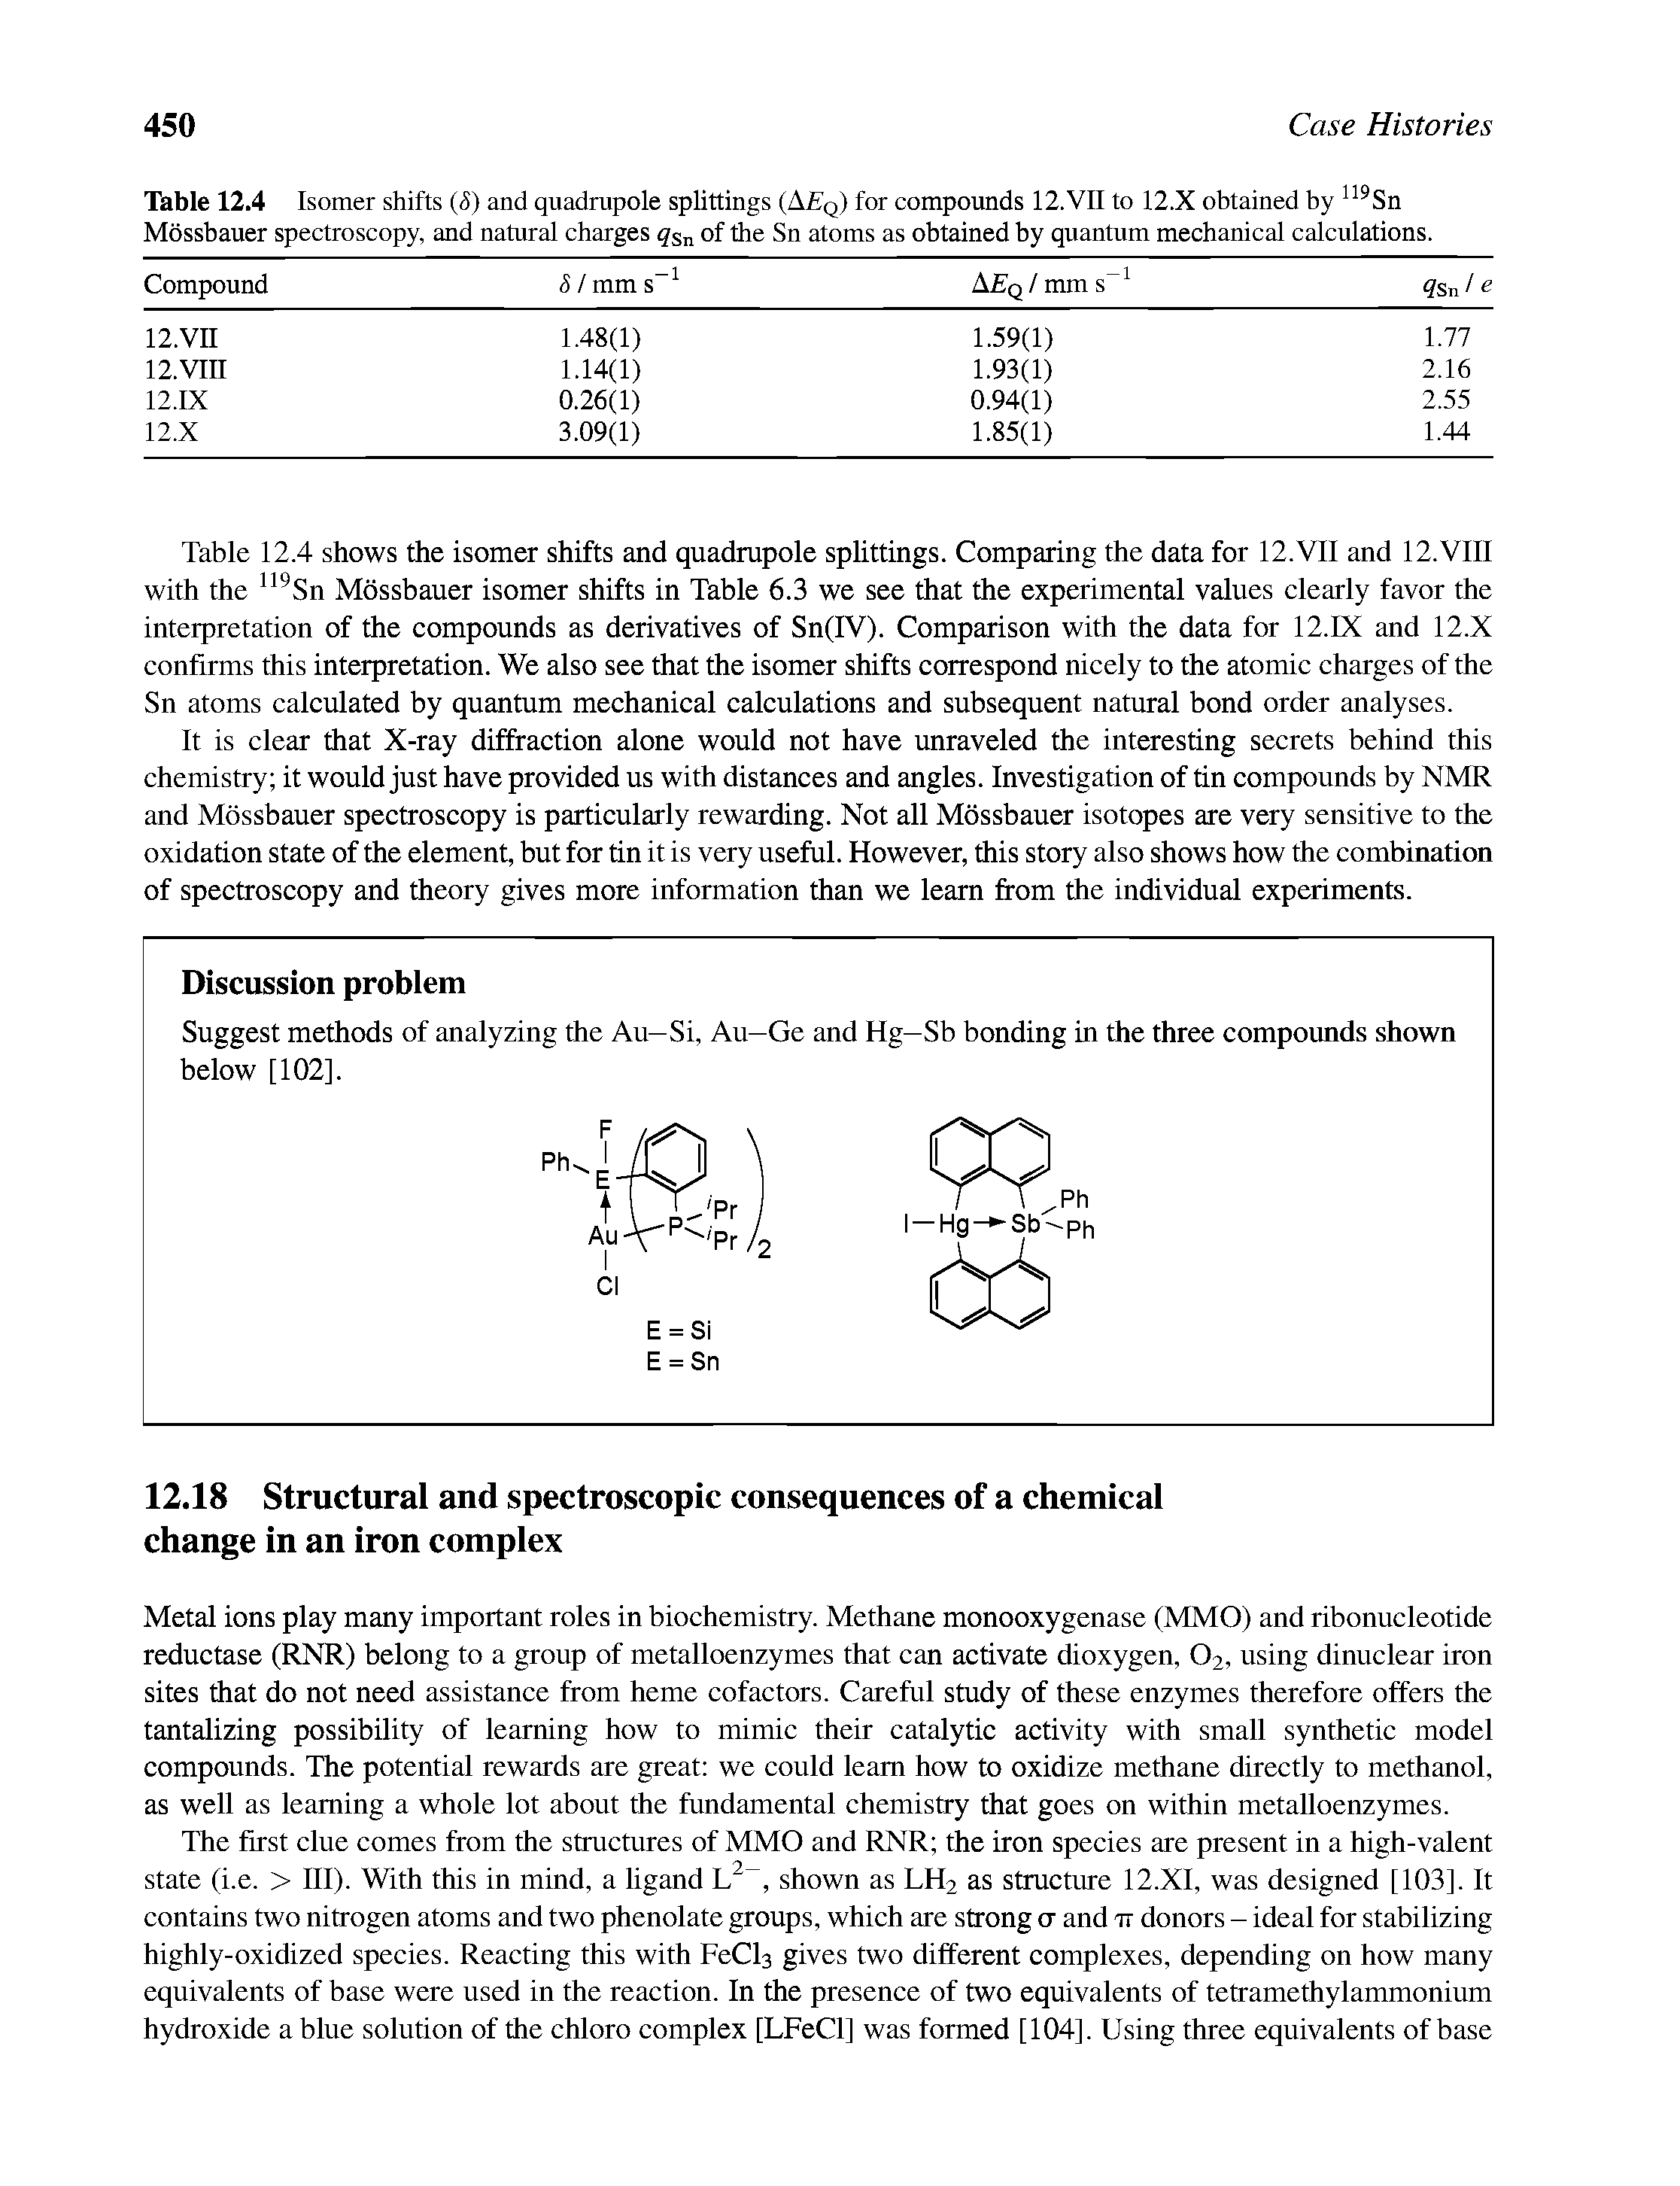 Table 12.4 Isomer shifts (5) and quadrupole splittings (A q) for compounds 12.Vn to 12.X obtained by Sn Mossbauer spectroscopy, and naturd charges of the Sn atoms as obtained by quantum mechanical calculations.